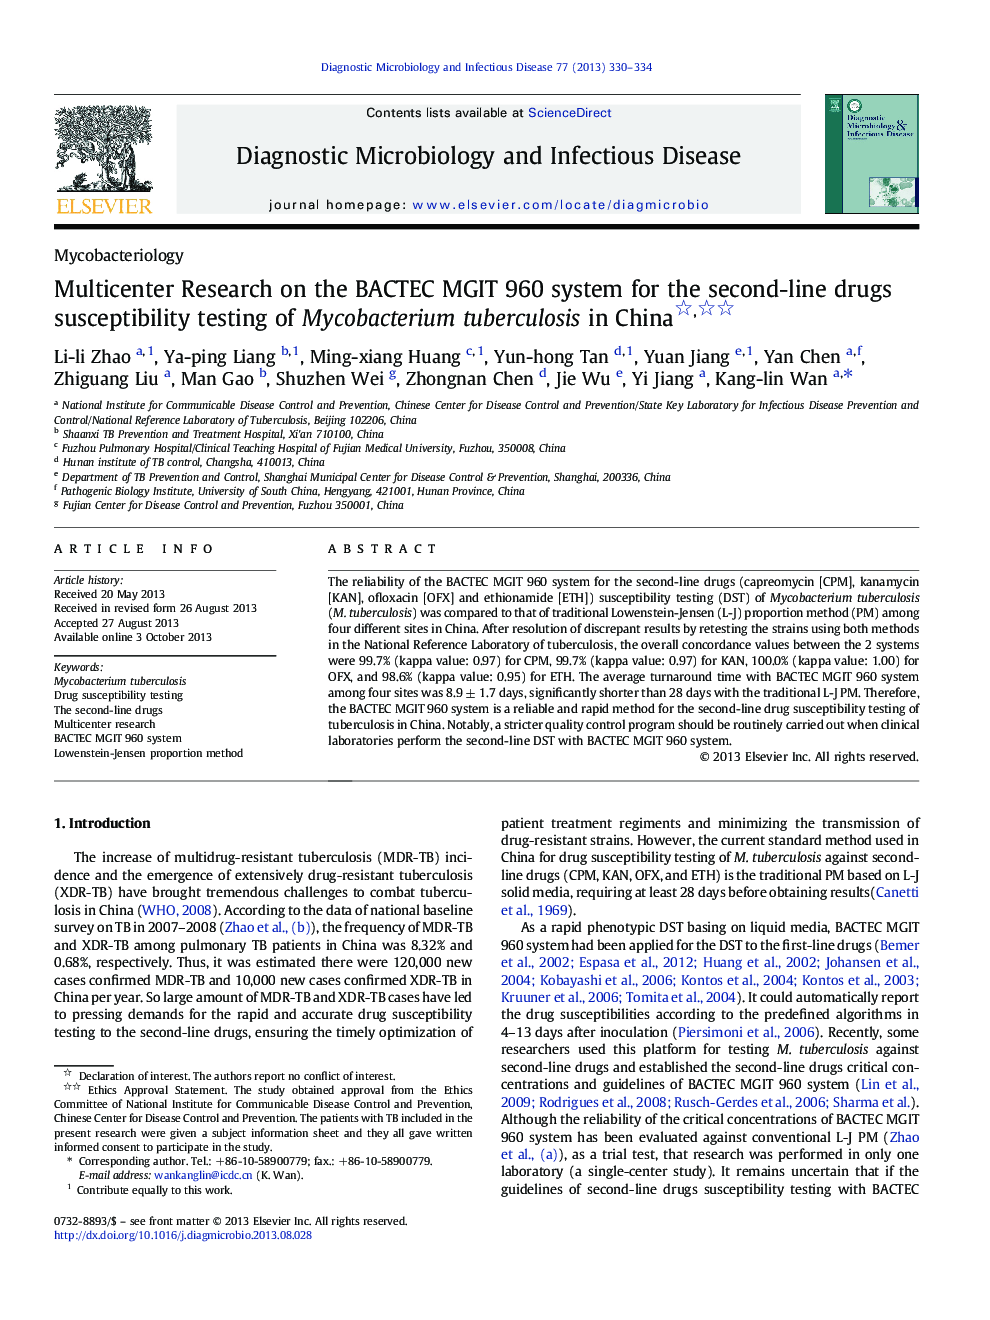 Multicenter Research on the BACTEC MGIT 960 system for the second-line drugs susceptibility testing of Mycobacterium tuberculosis in China 